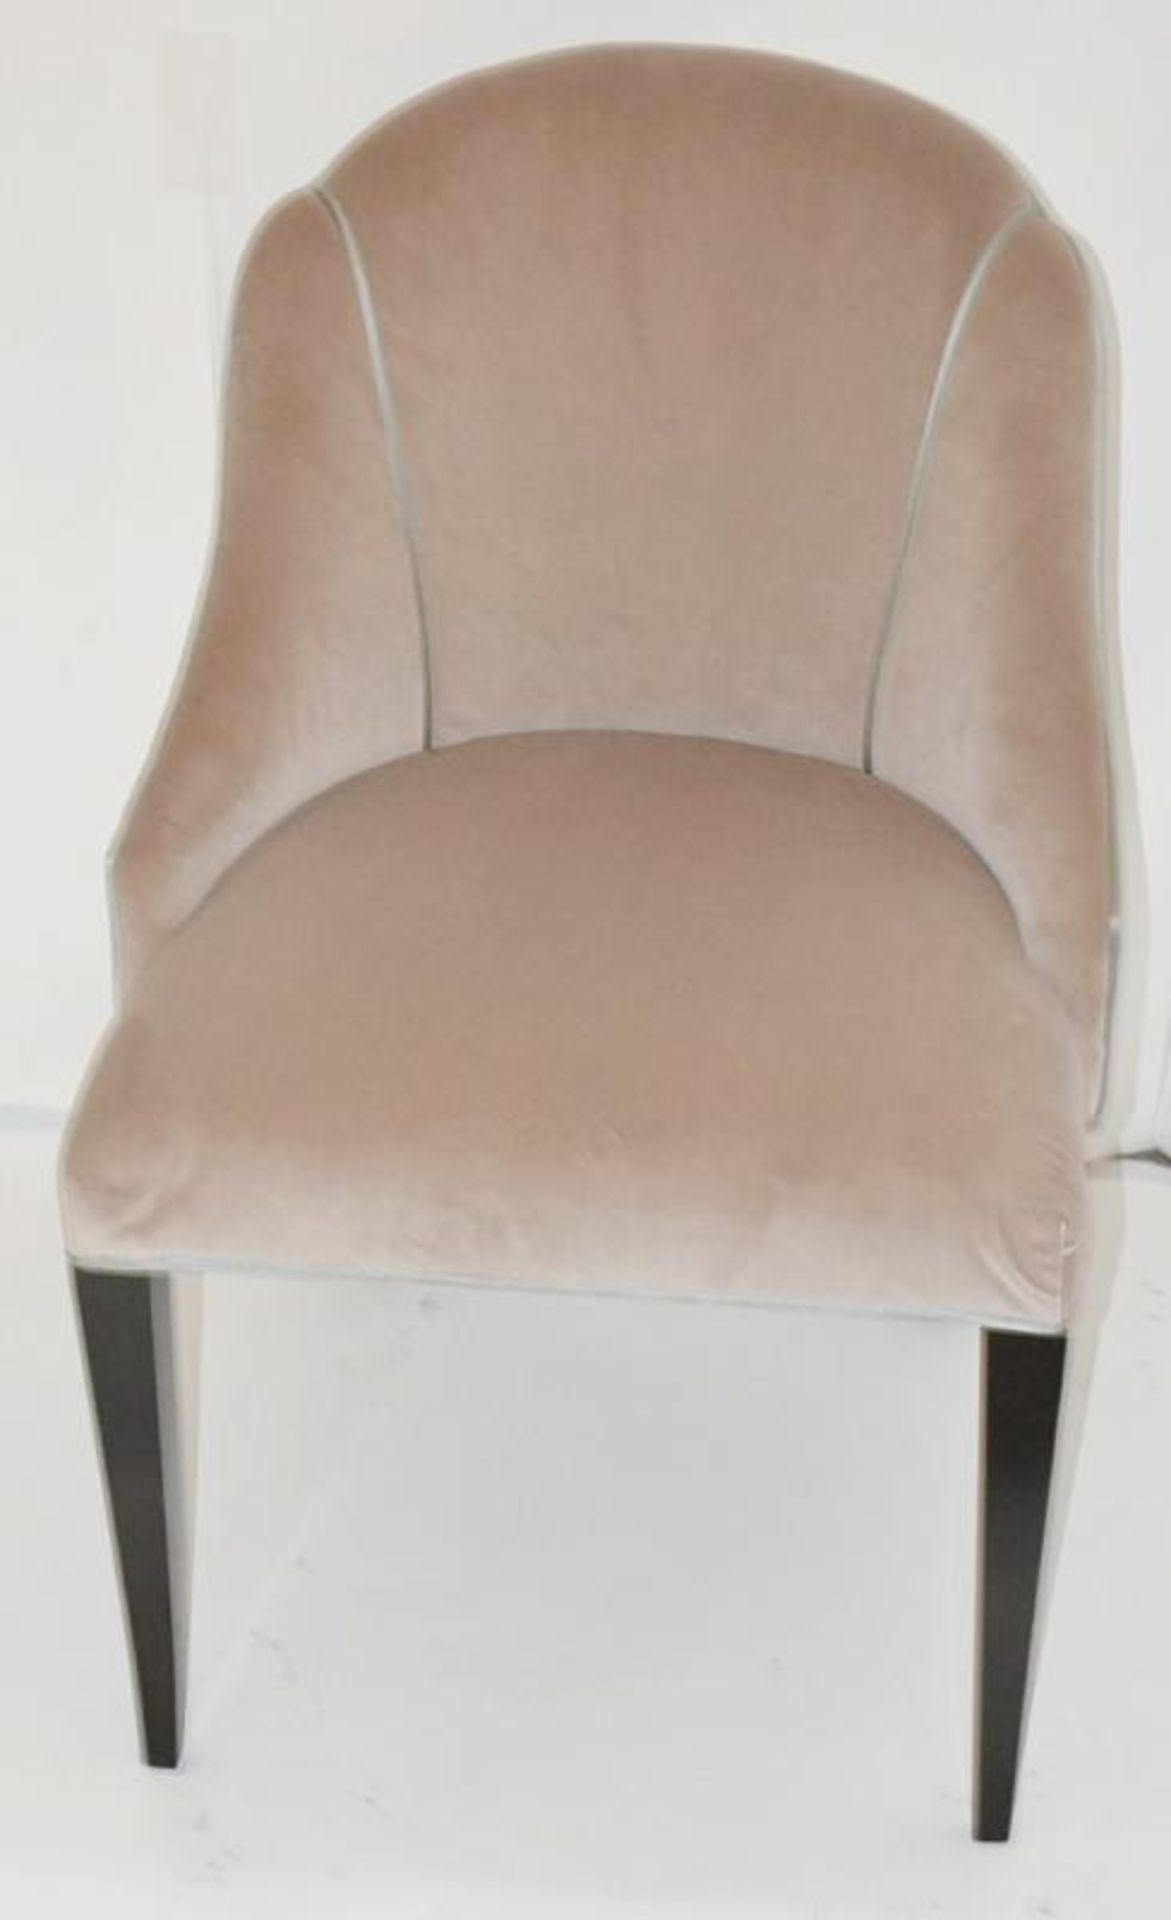 1 x REED &amp; RACKSTRAW "Cloud" Velvet Upholstered Handcrafted Chair - Dimensions: H87 x W58 x D5 - Image 3 of 24